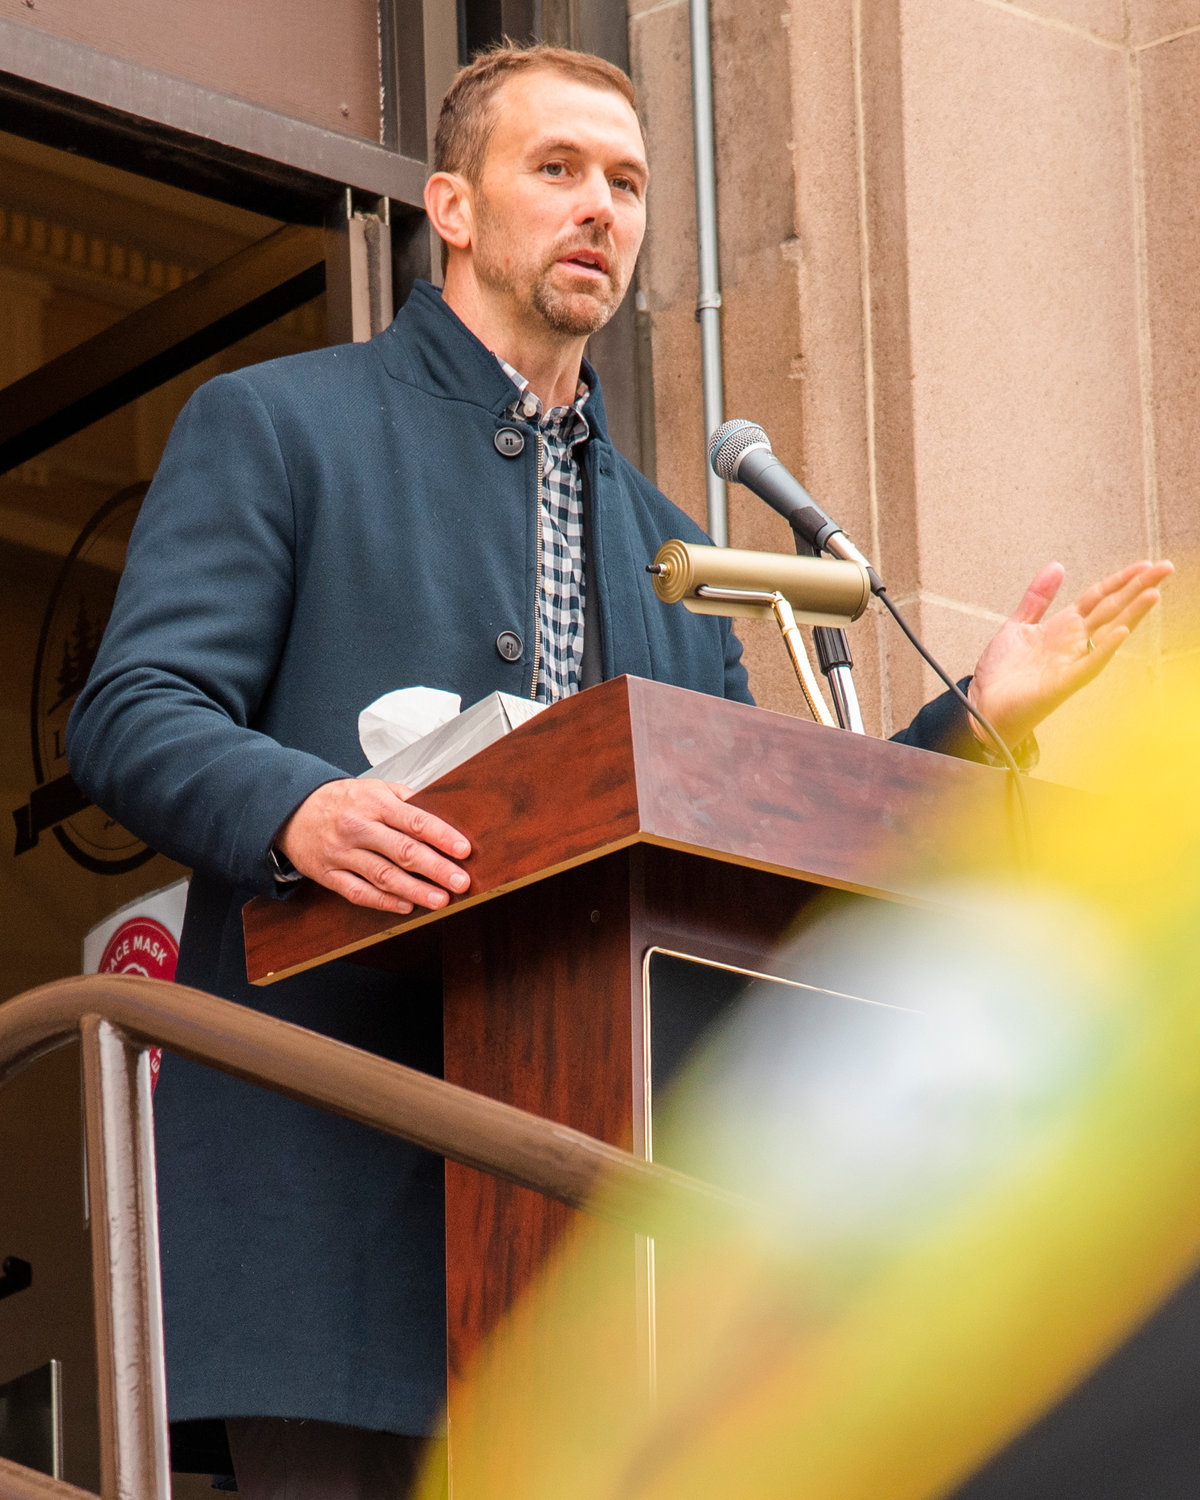 Commissioner Sean Swope talks about Gary Stamper and his neighborly spirit during a ceremony honoring his life riday morning at the steps of the Lewis County Historical Courthouse Friday morning in Chehalis.